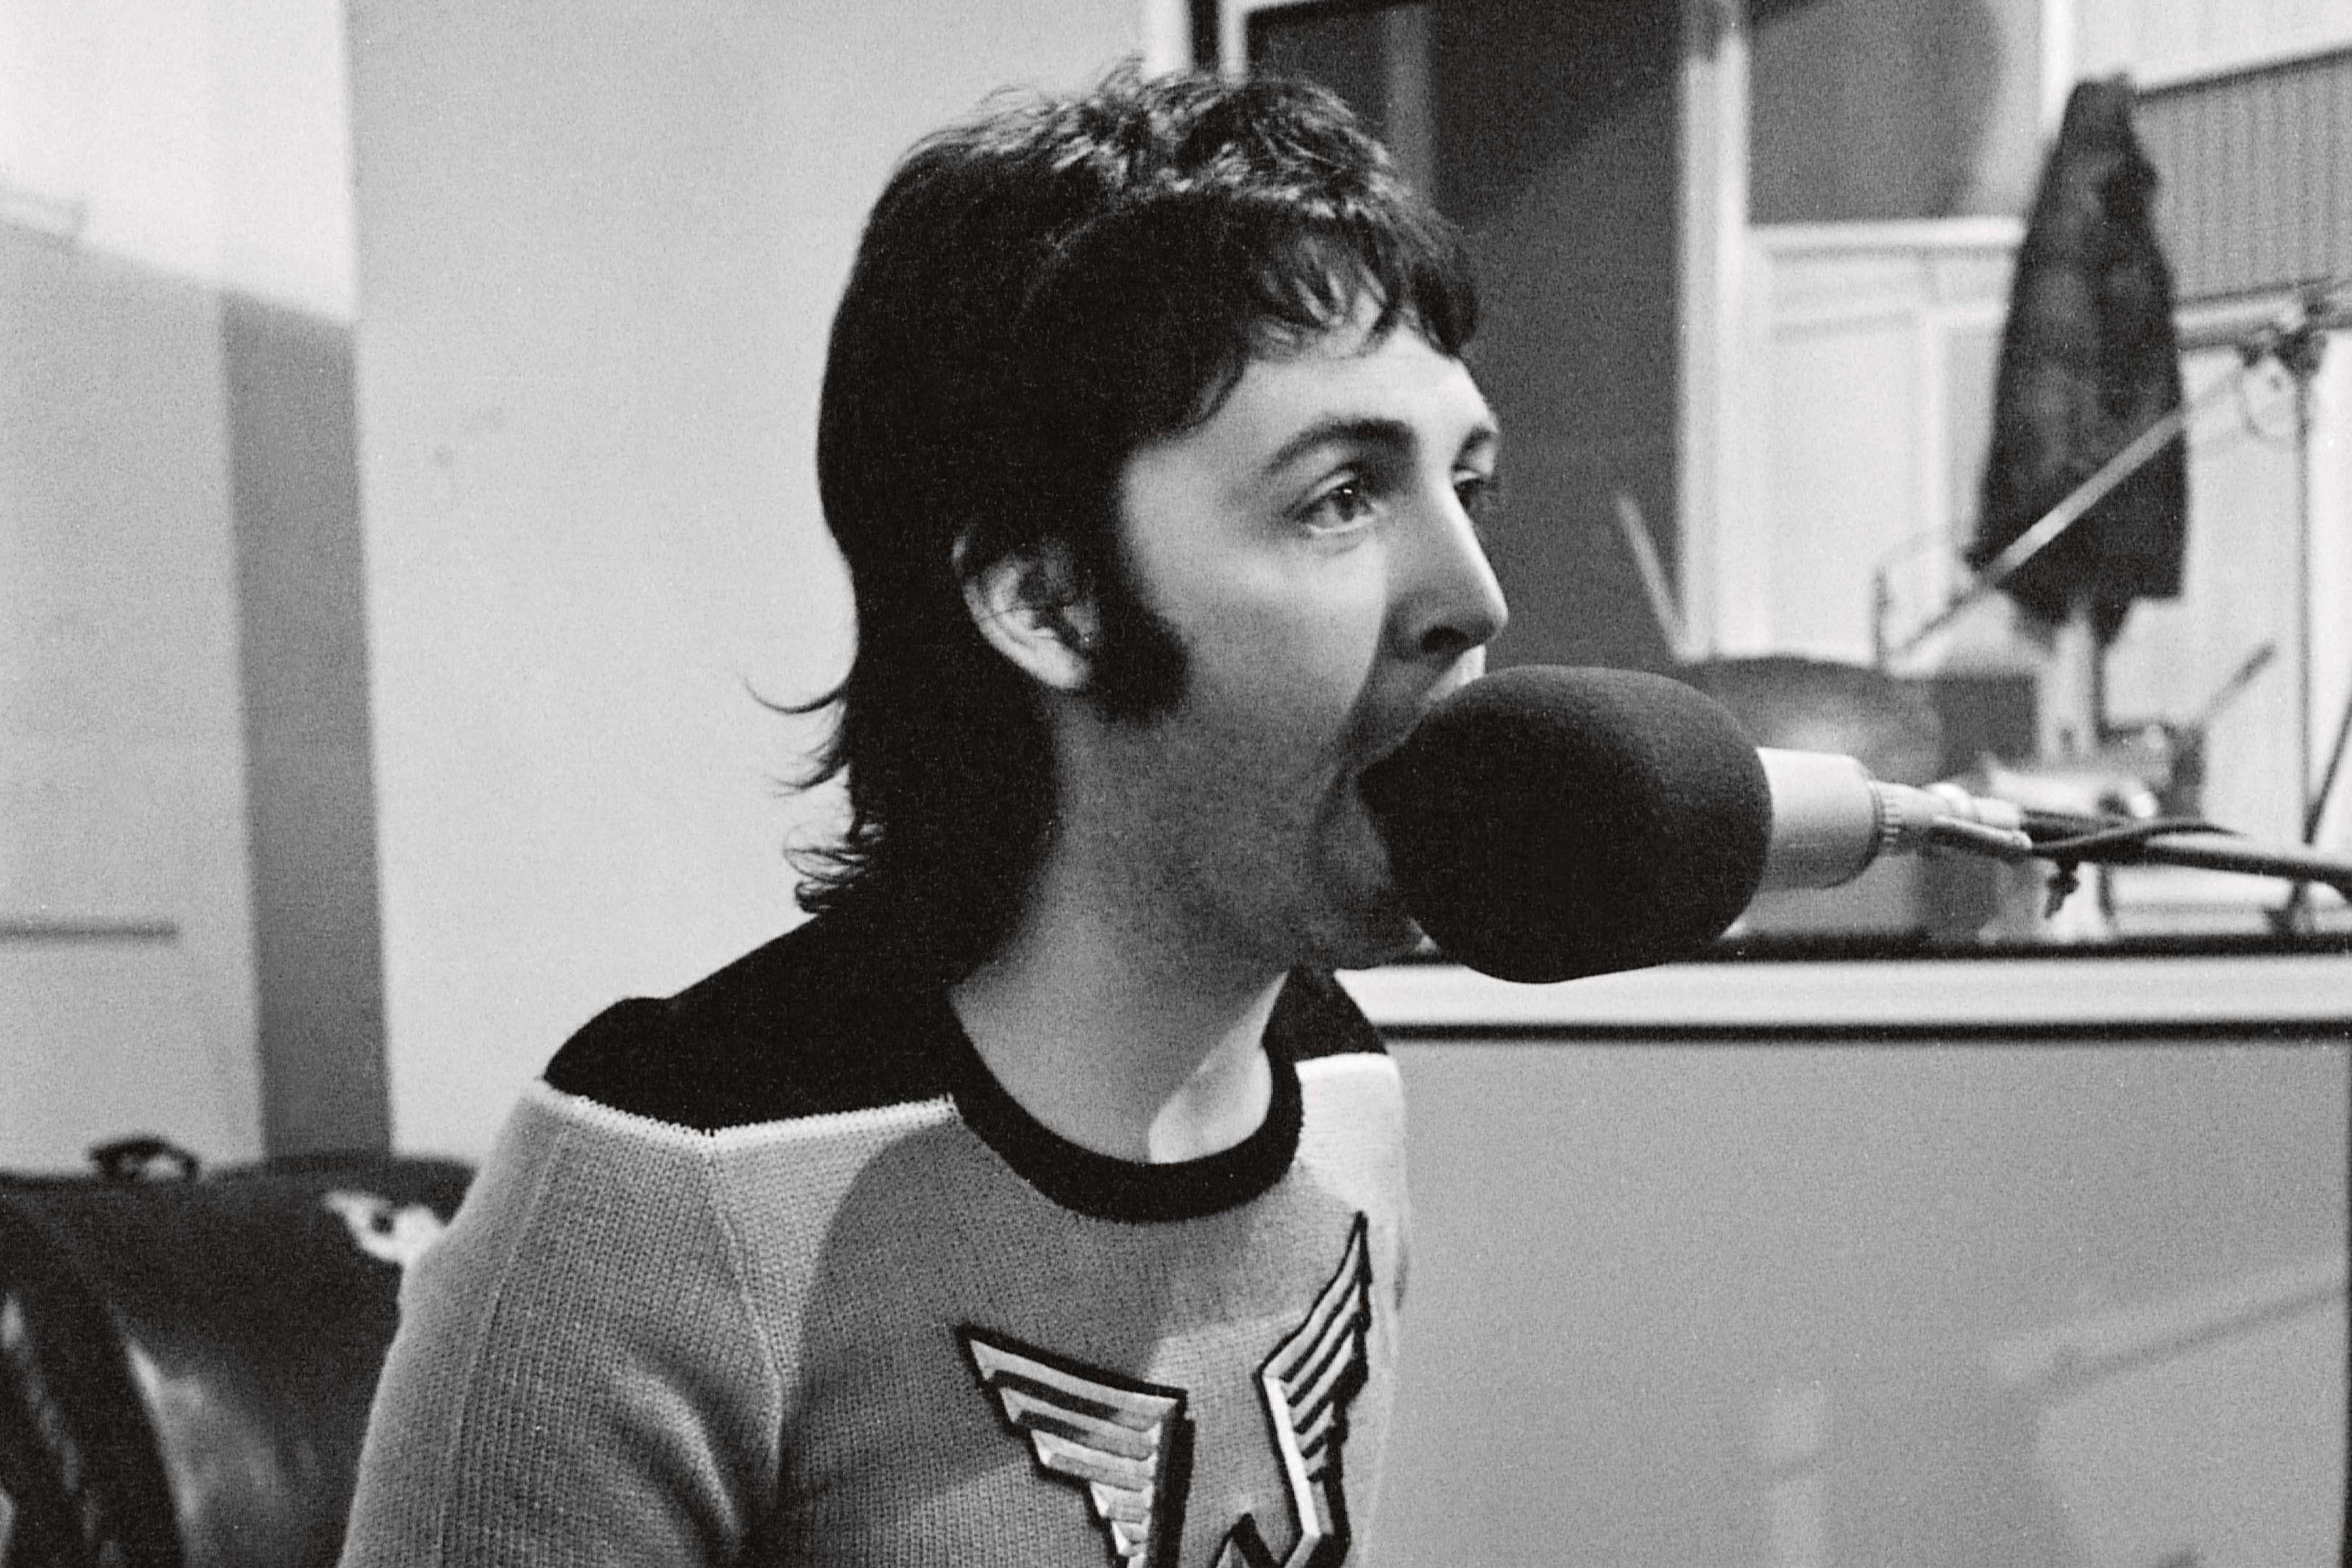 Black and white photo of Paul singing into a microphone